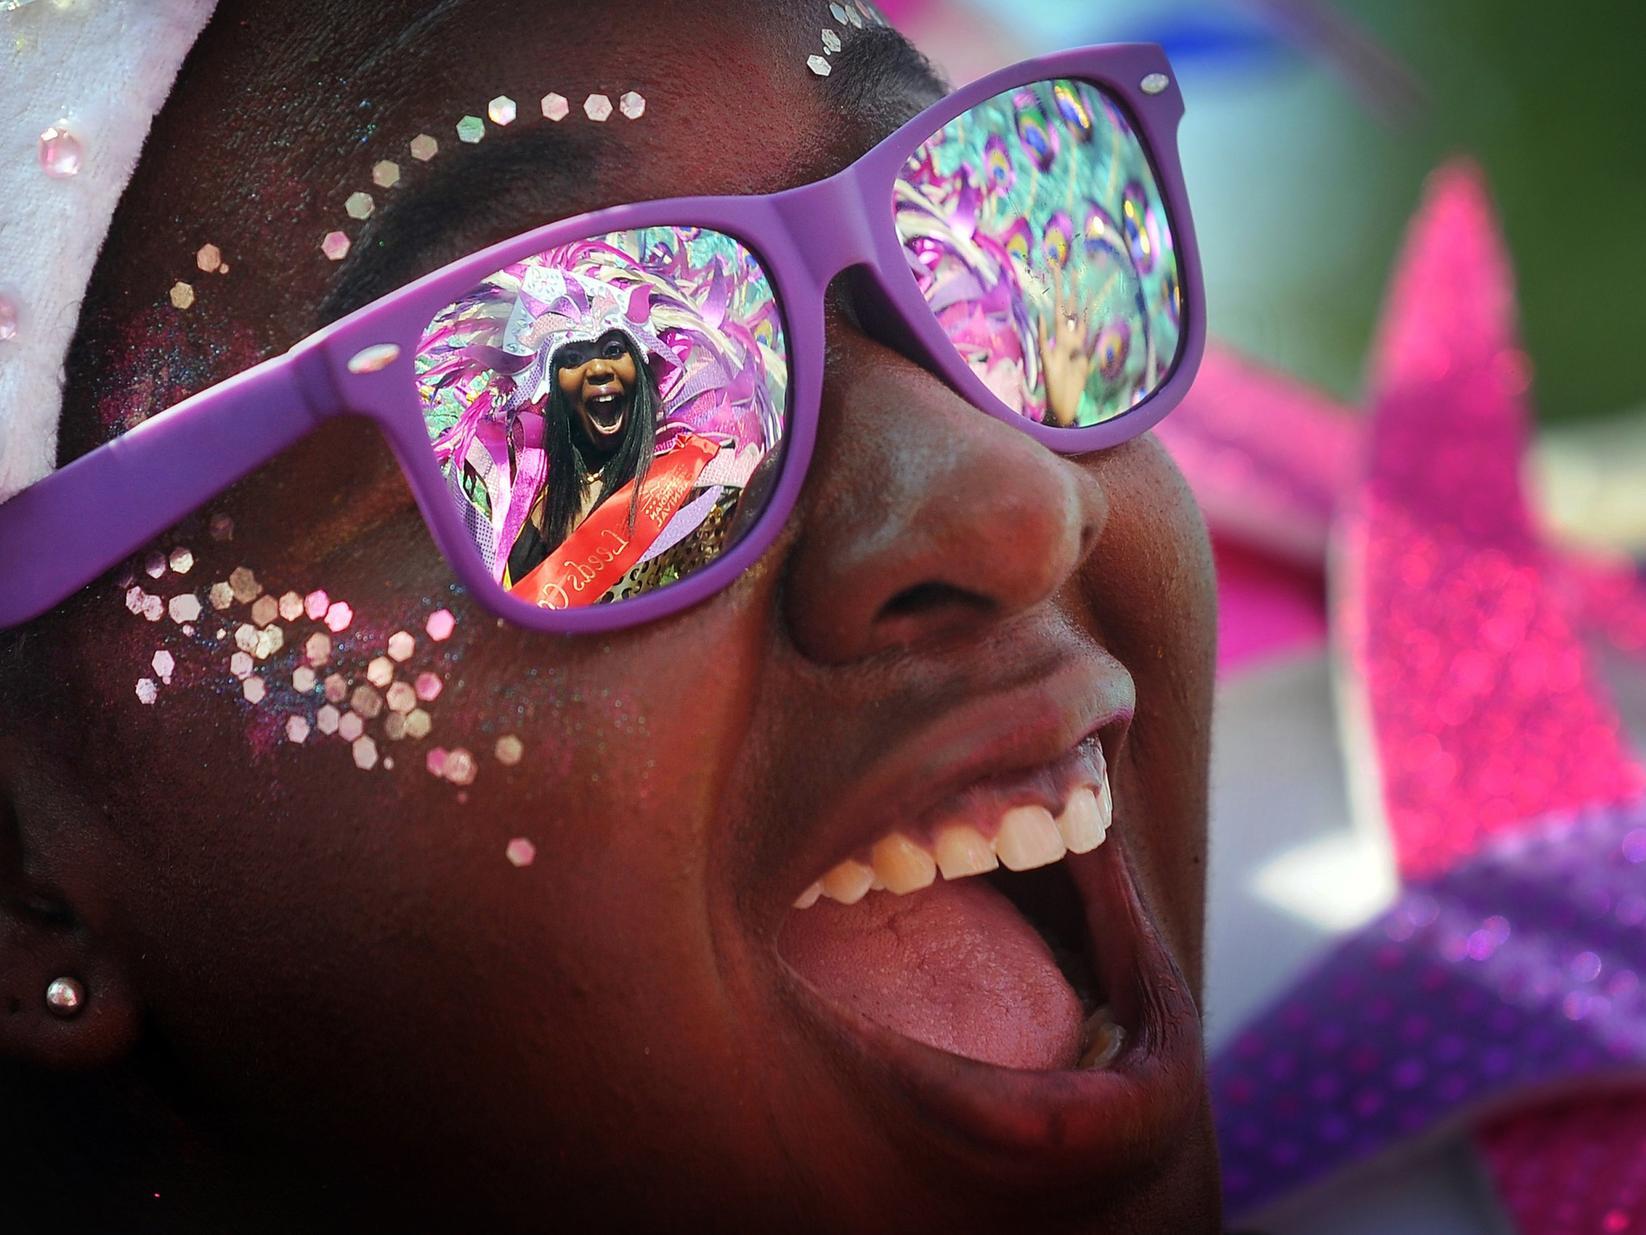 Leeds West Indian Carnival queen Tahiela Odain Hamilton is reflected in the glasses of Eleanor Claxton.